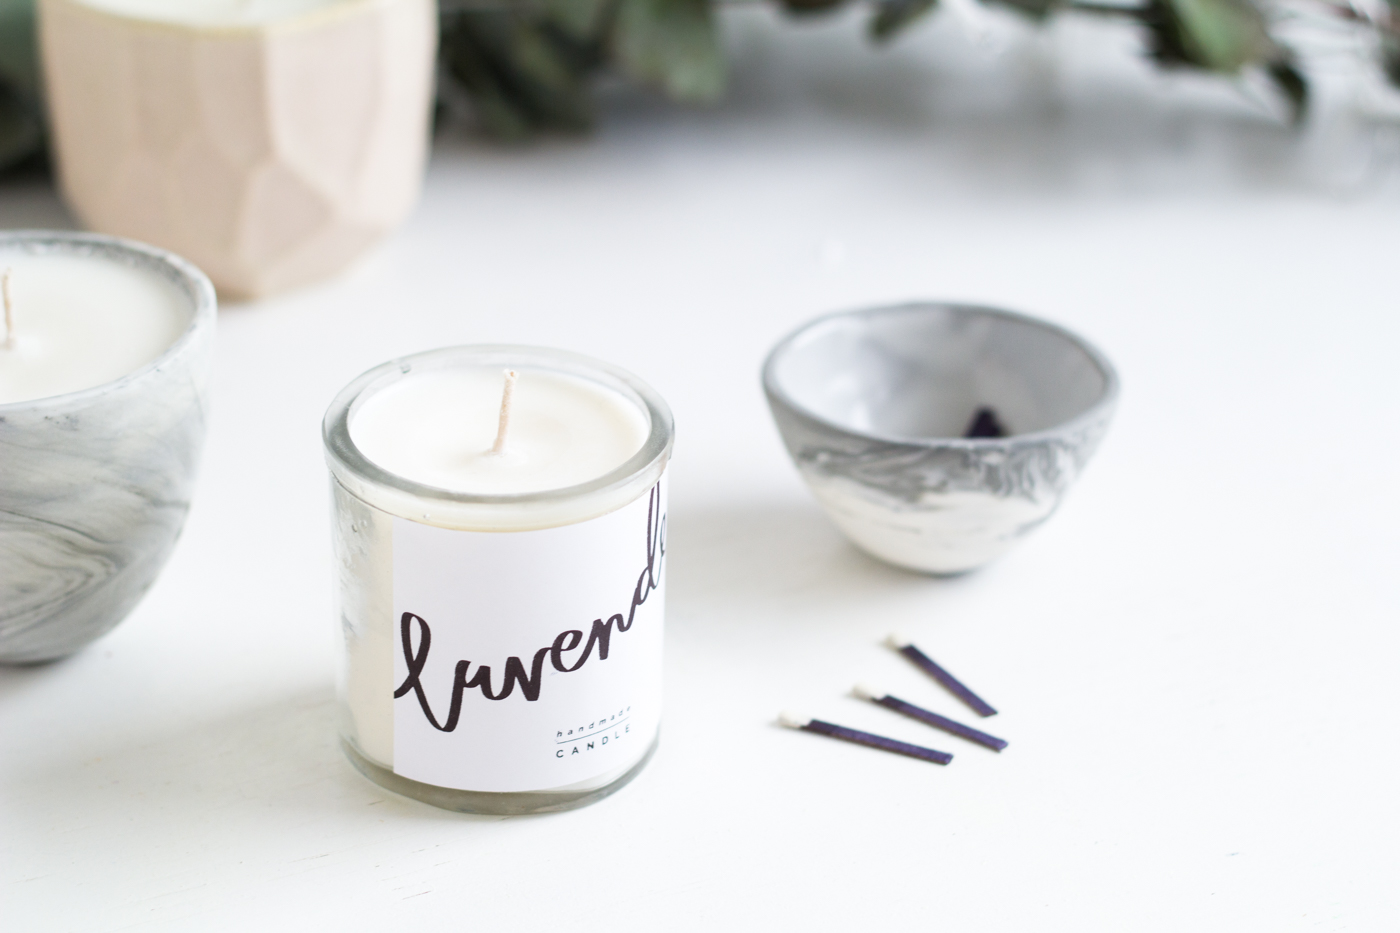 DIY Scented Candle Gifts & Free Printable labels | Fall For DIY